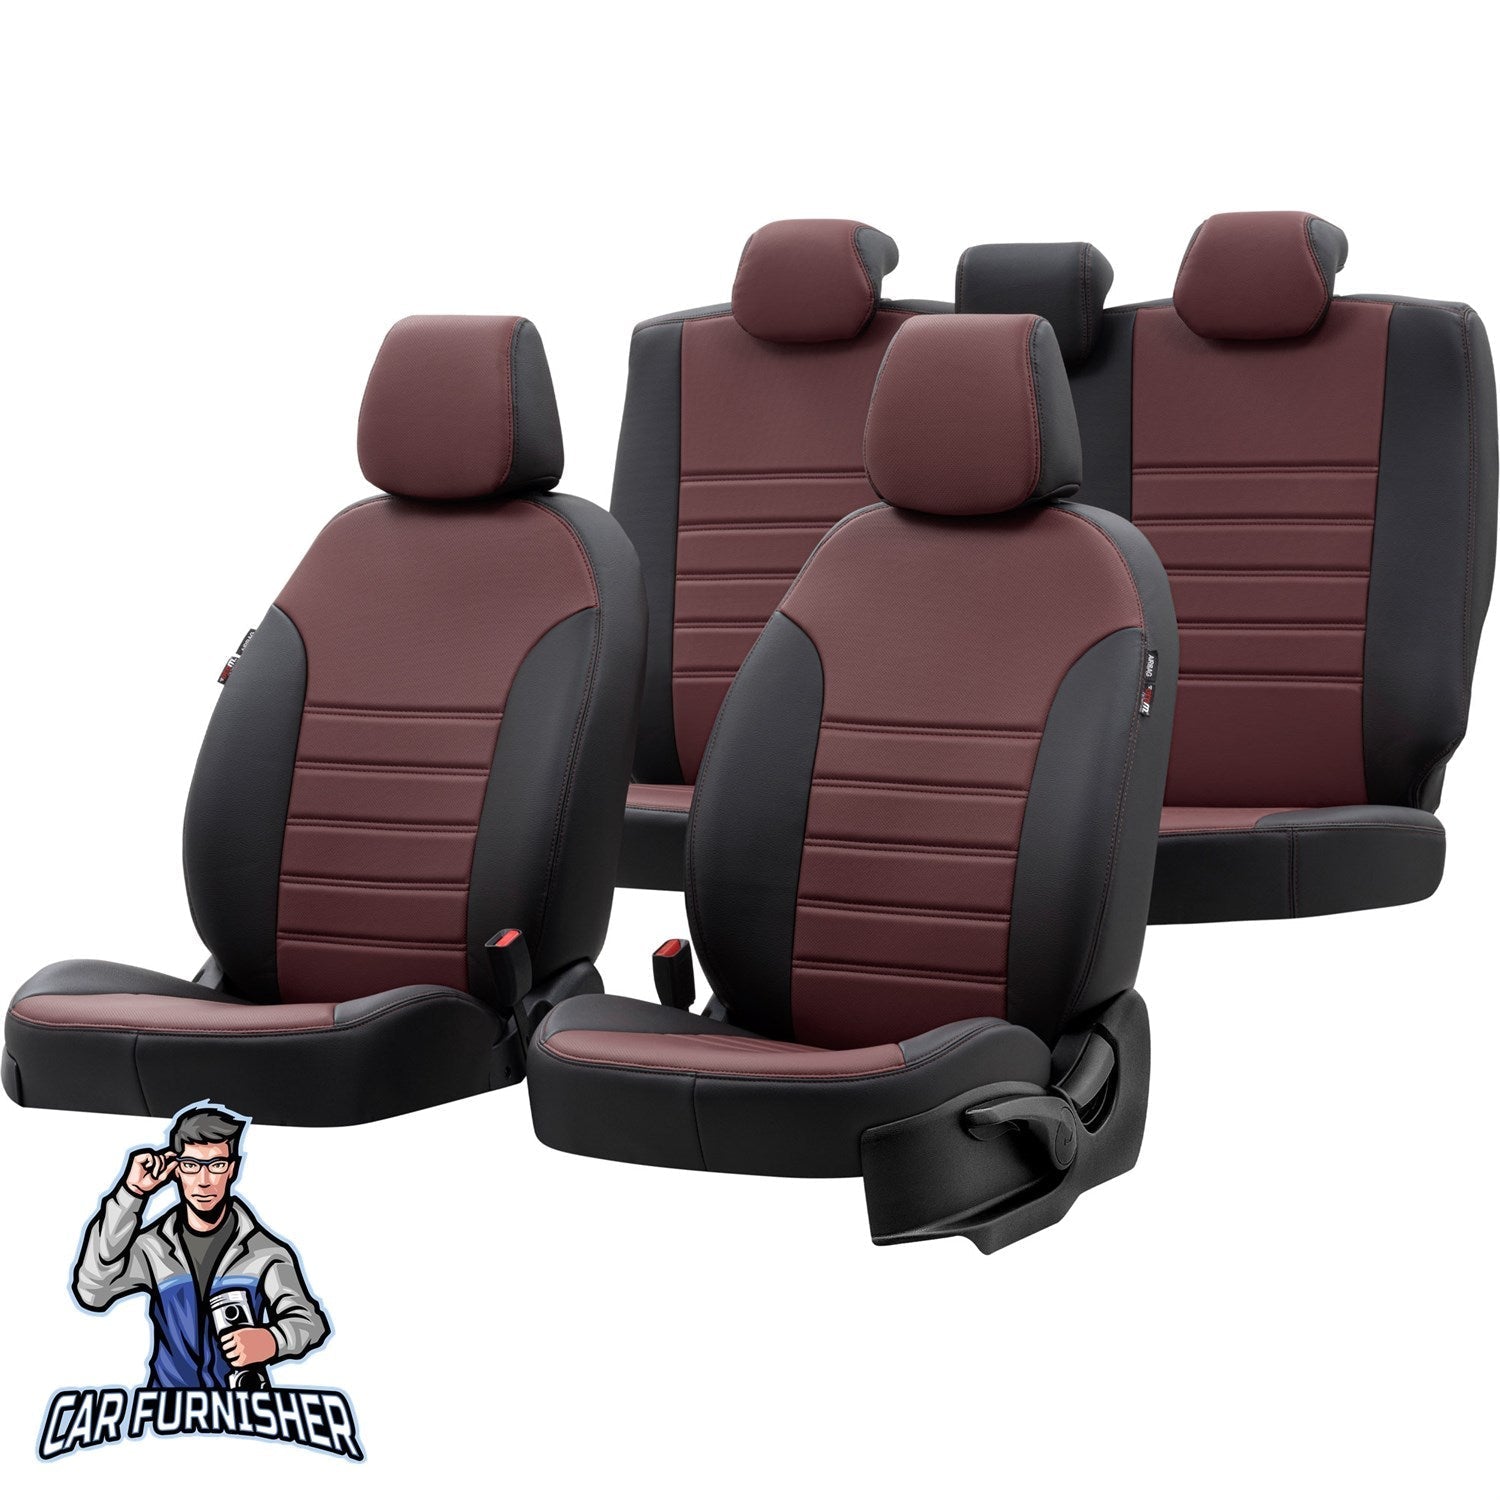 Citroen Jumper Seat Covers Istanbul Leather Design Burgundy Leather